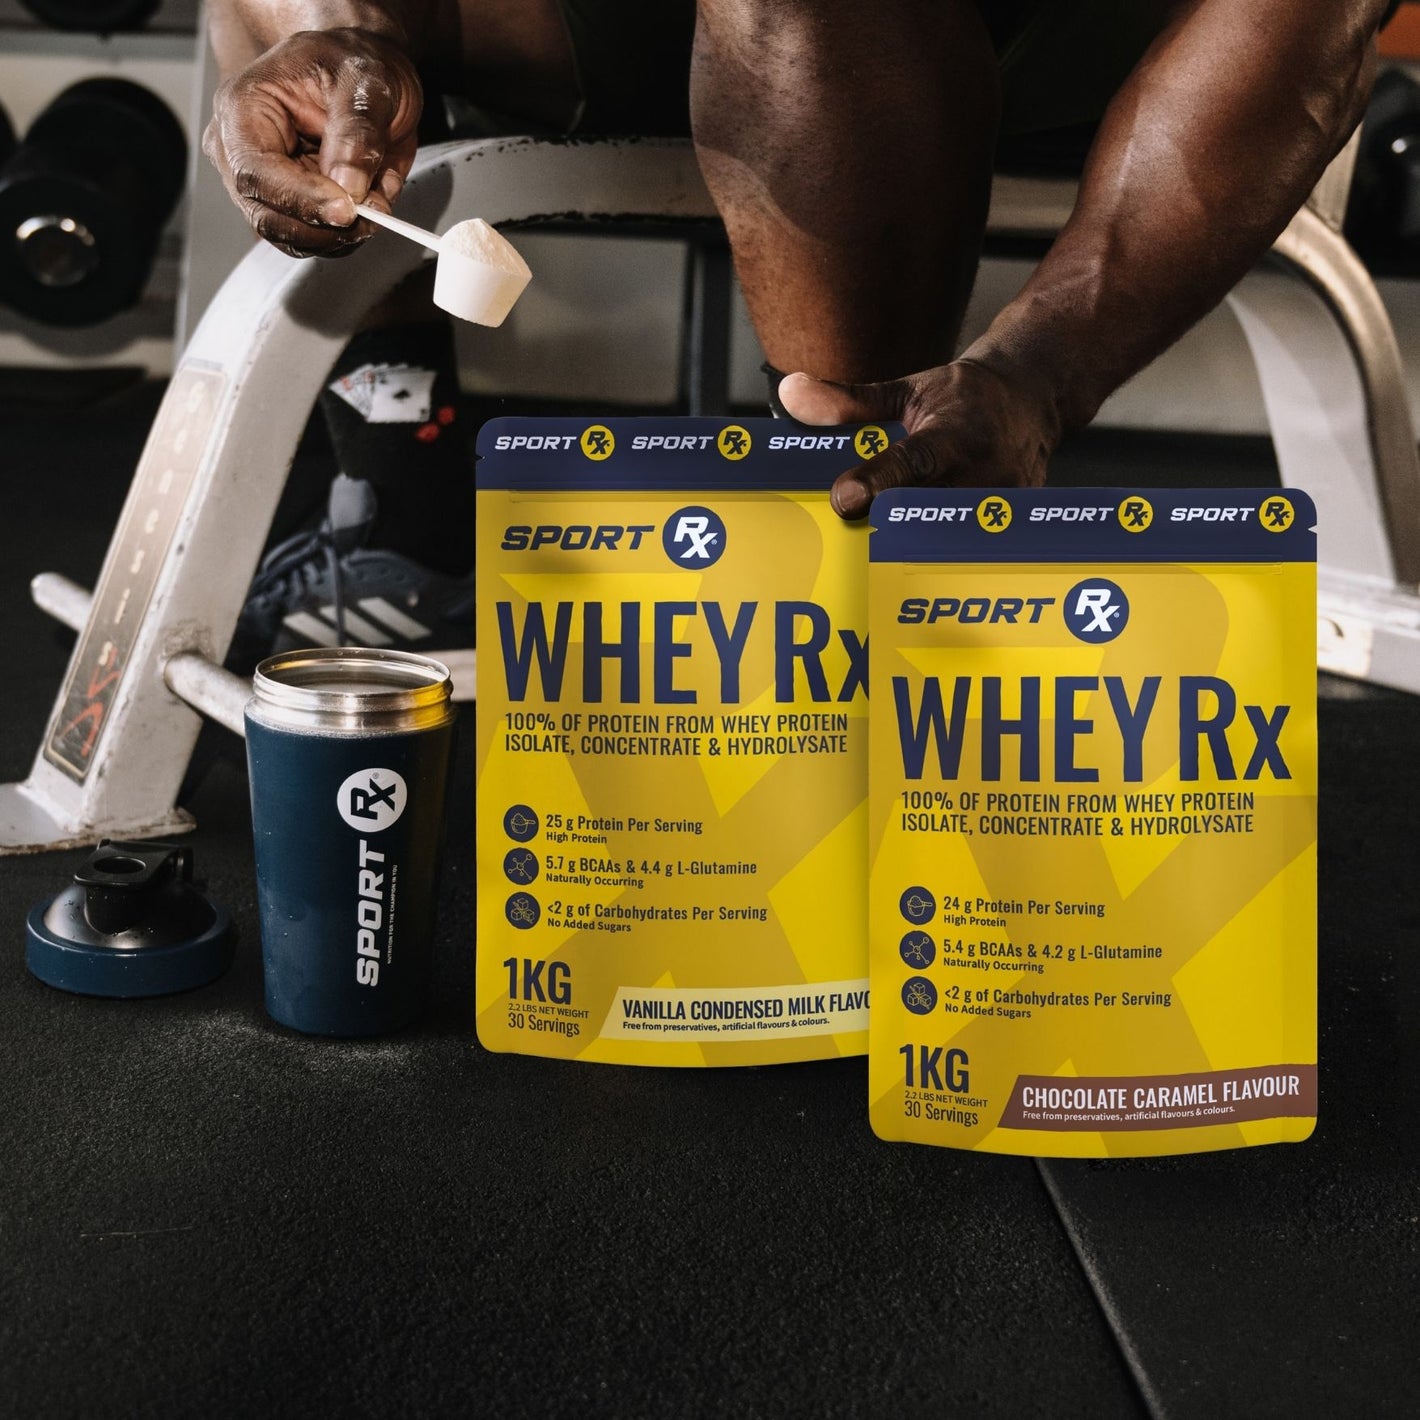 SPORT_Rx_Athlete_Scooping_WHEY_Rx_Product_With_SPORT_Rx_Shaker_In_A_Gym_Setting